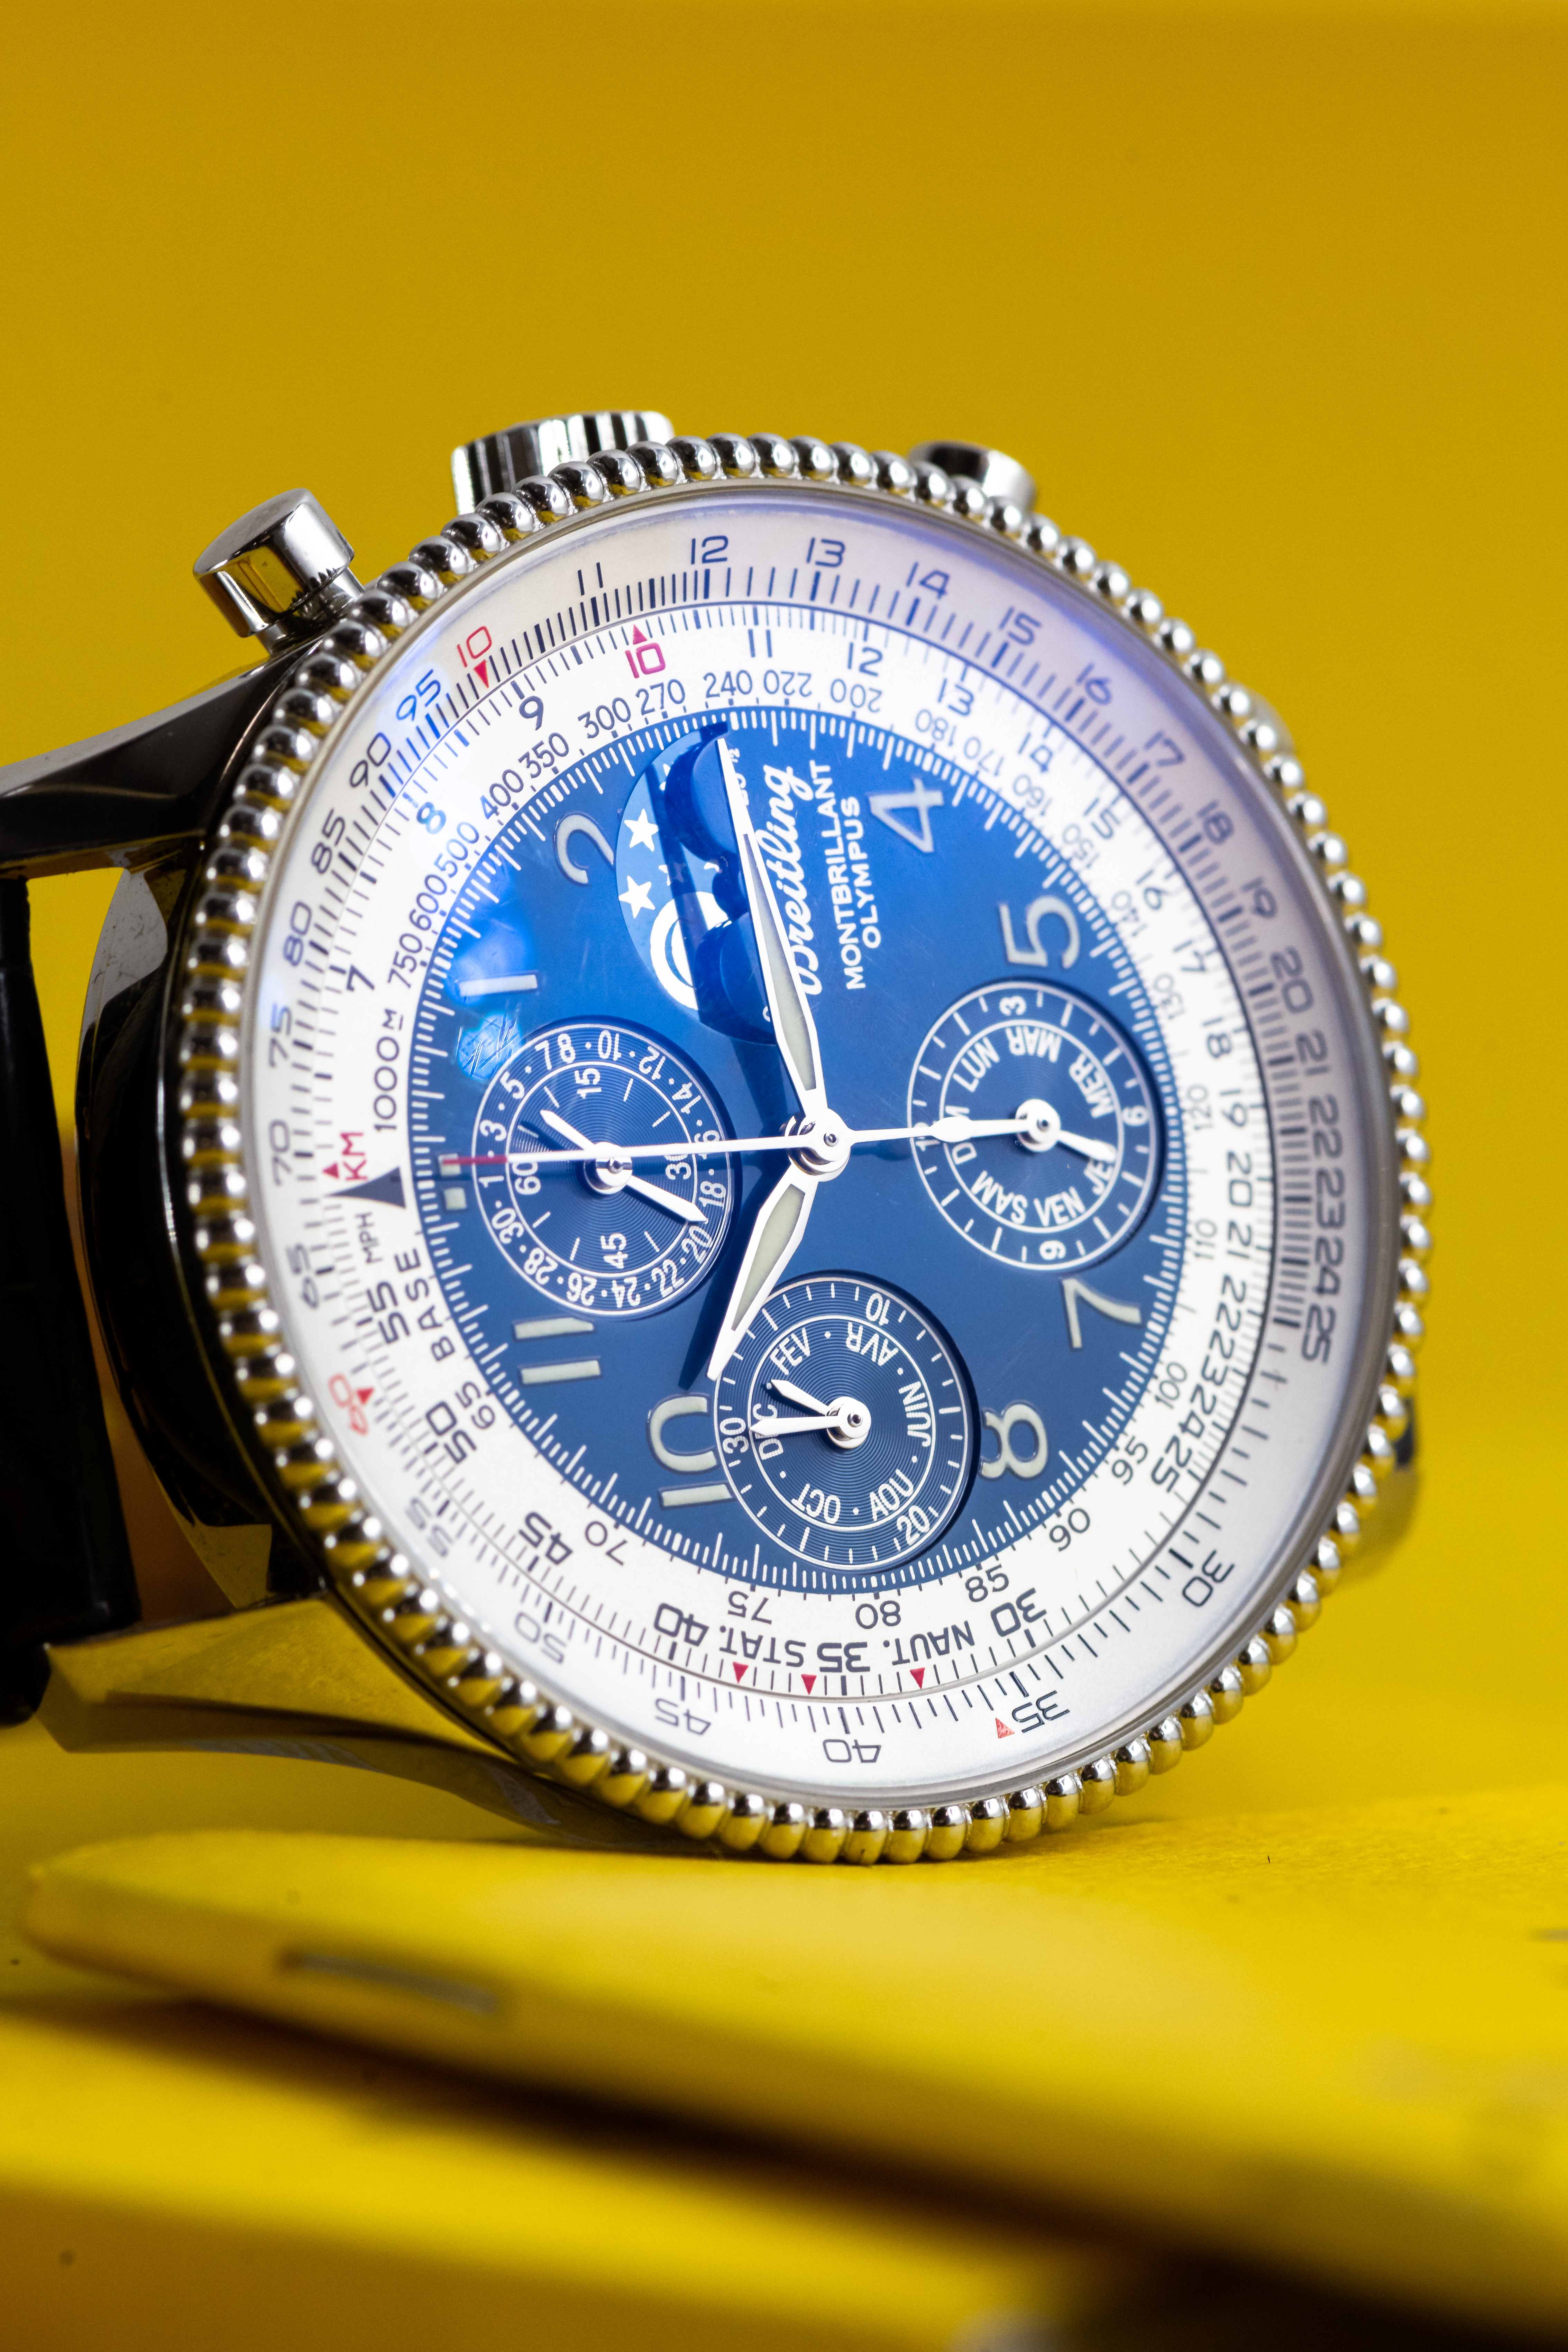 Breitling Montbrilliant Olympus Chronograph Automatic Chronometer Blue Dial  Men's Watch A1935012/C667.442A - Watches, Montbrilliant Olympus - Jomashop